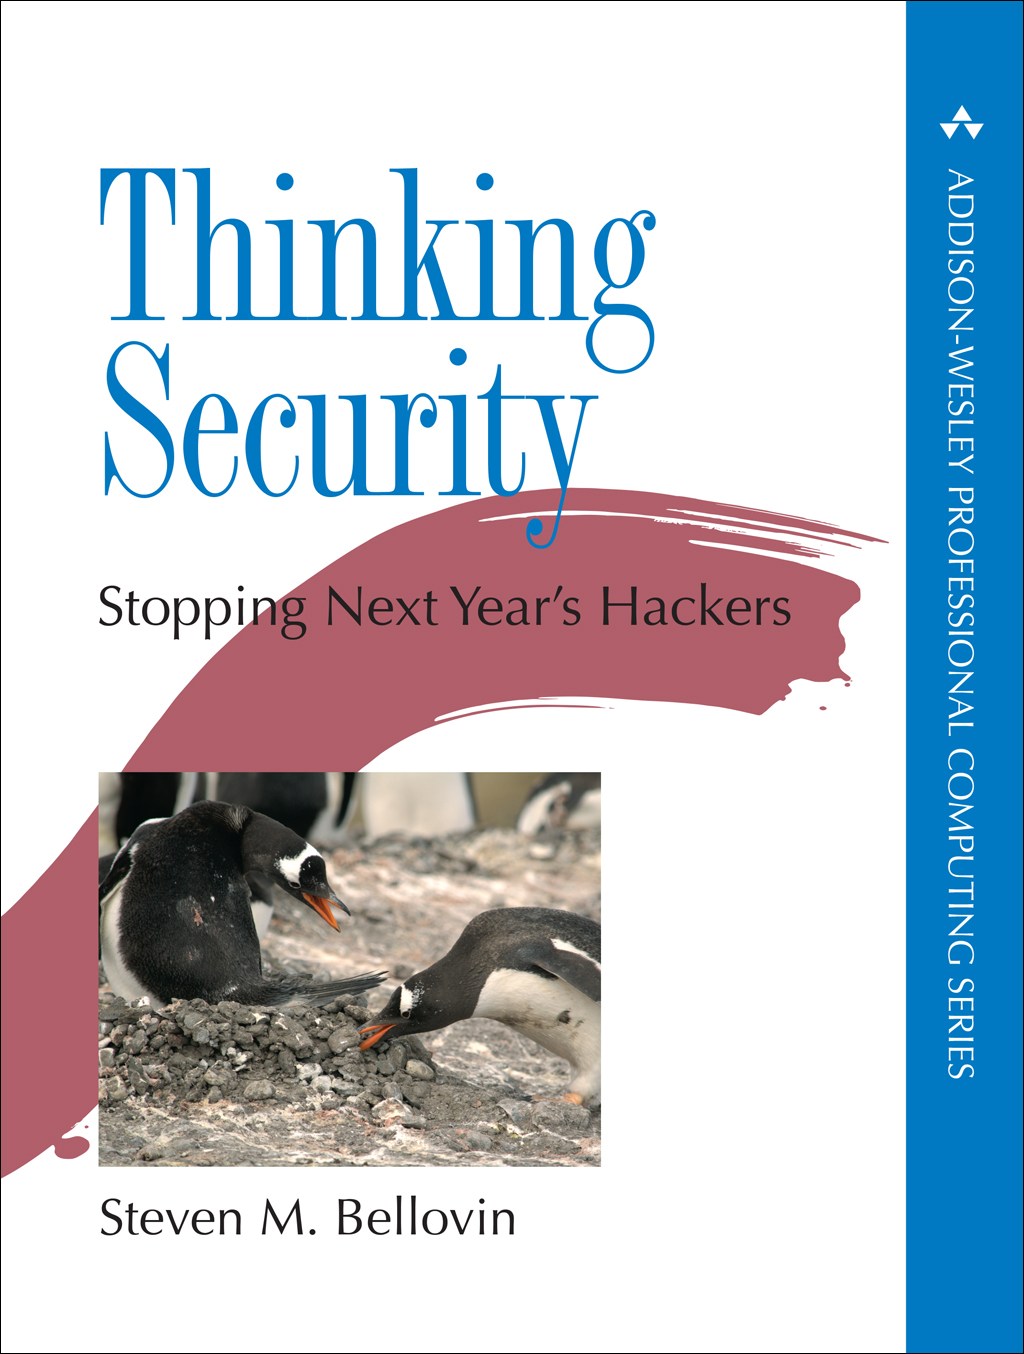 Thinking Security